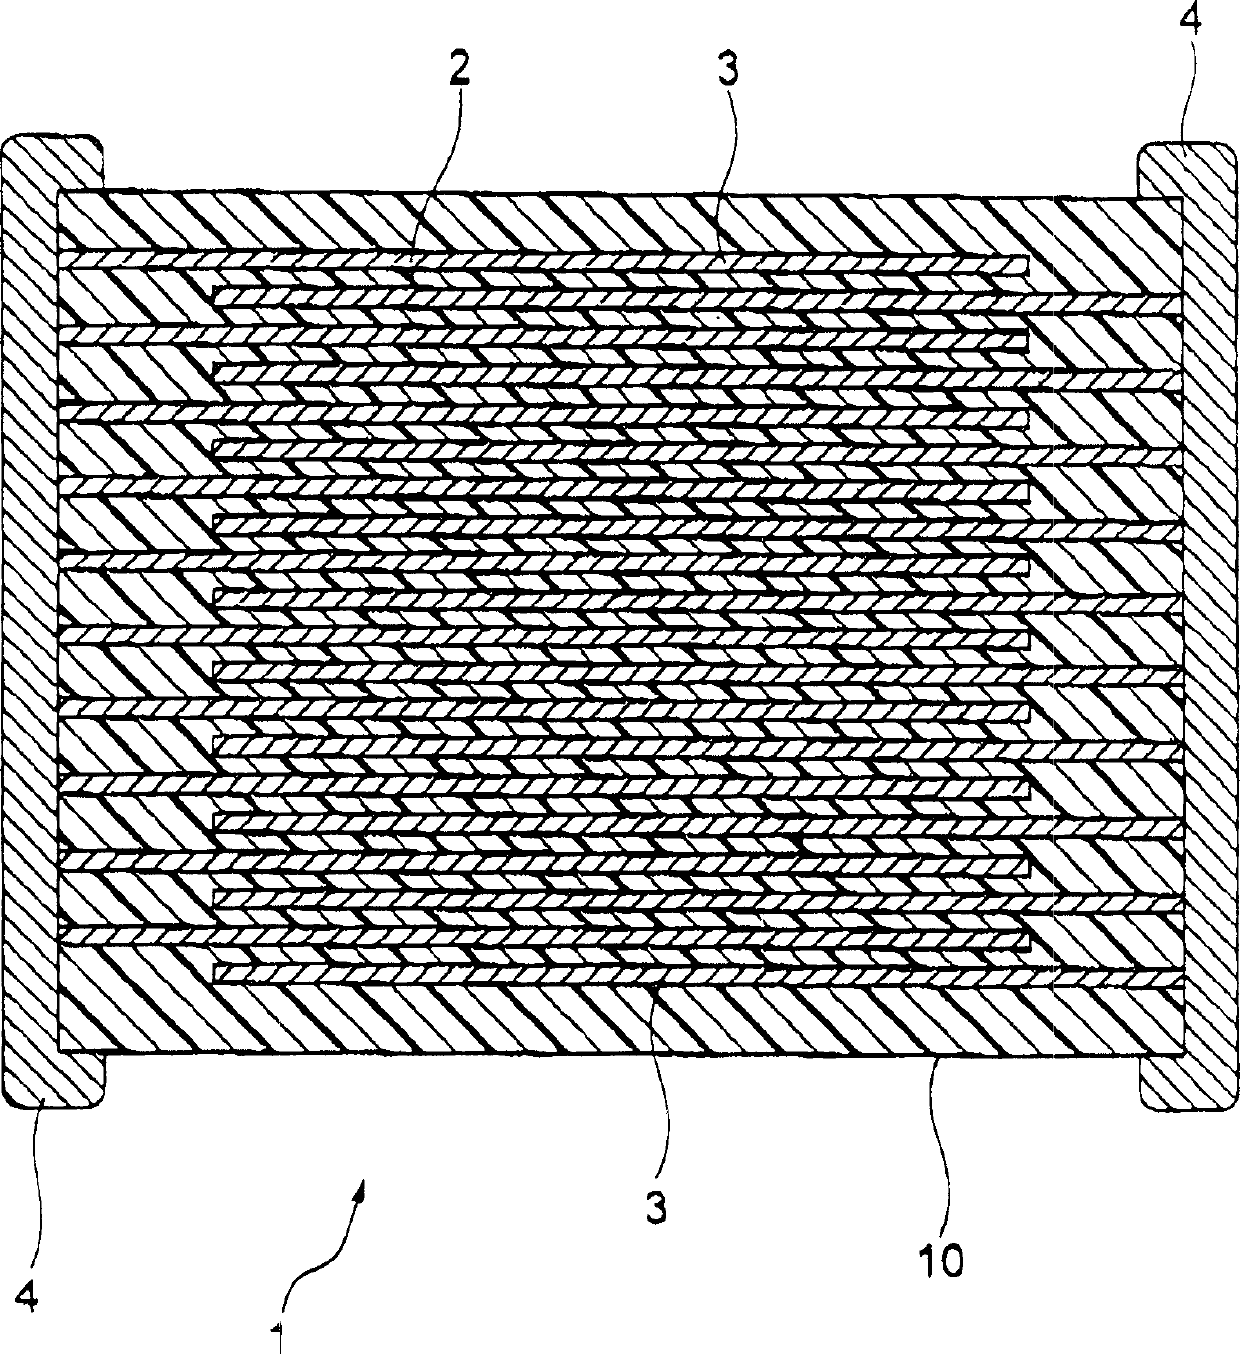 Dielectric ceramic composite and electronic device